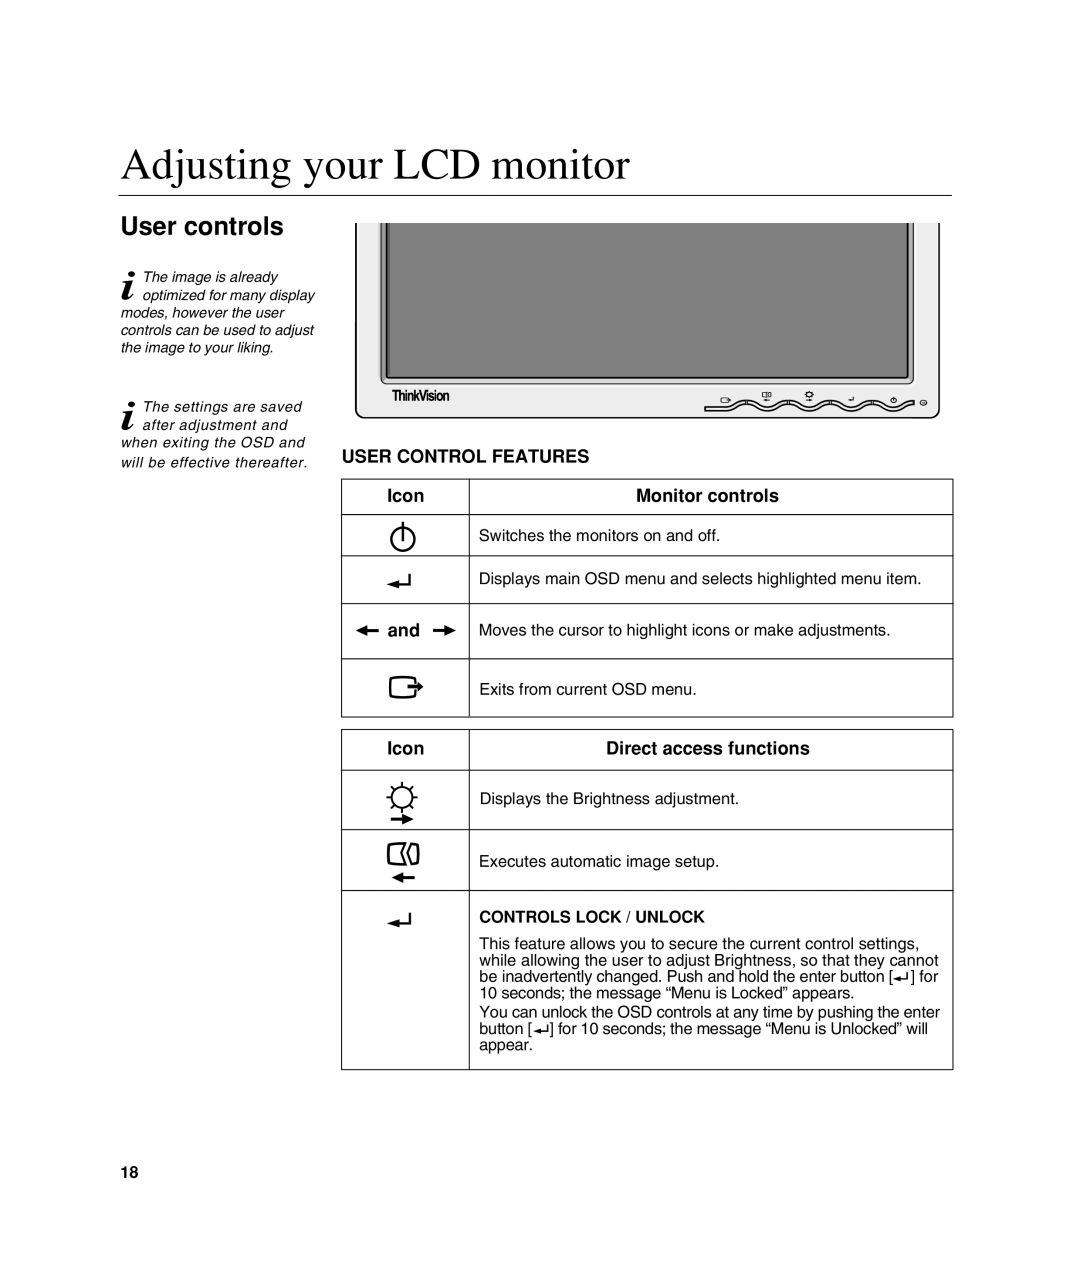 Lenovo L190 manual Adjusting your LCD monitor, User controls, User Control Features, Icon, Monitor controls, ThinkVision 